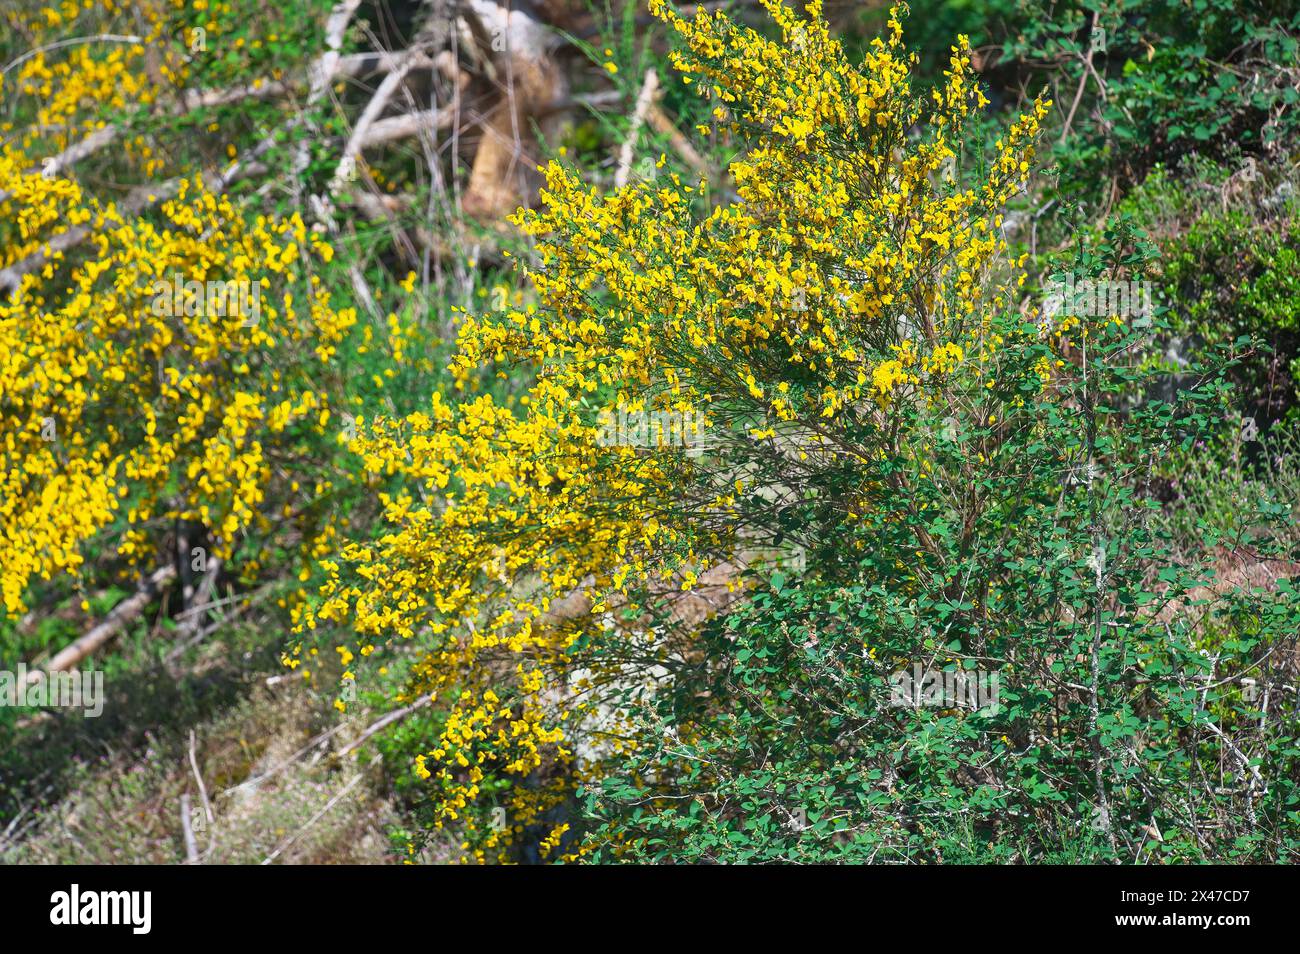 Common Broom or Scotch Broom (Cytisus scoparius) - a perennial evergreen shrub in the pea family (Fabaceae) - Pacific Northwest. Stock Photo